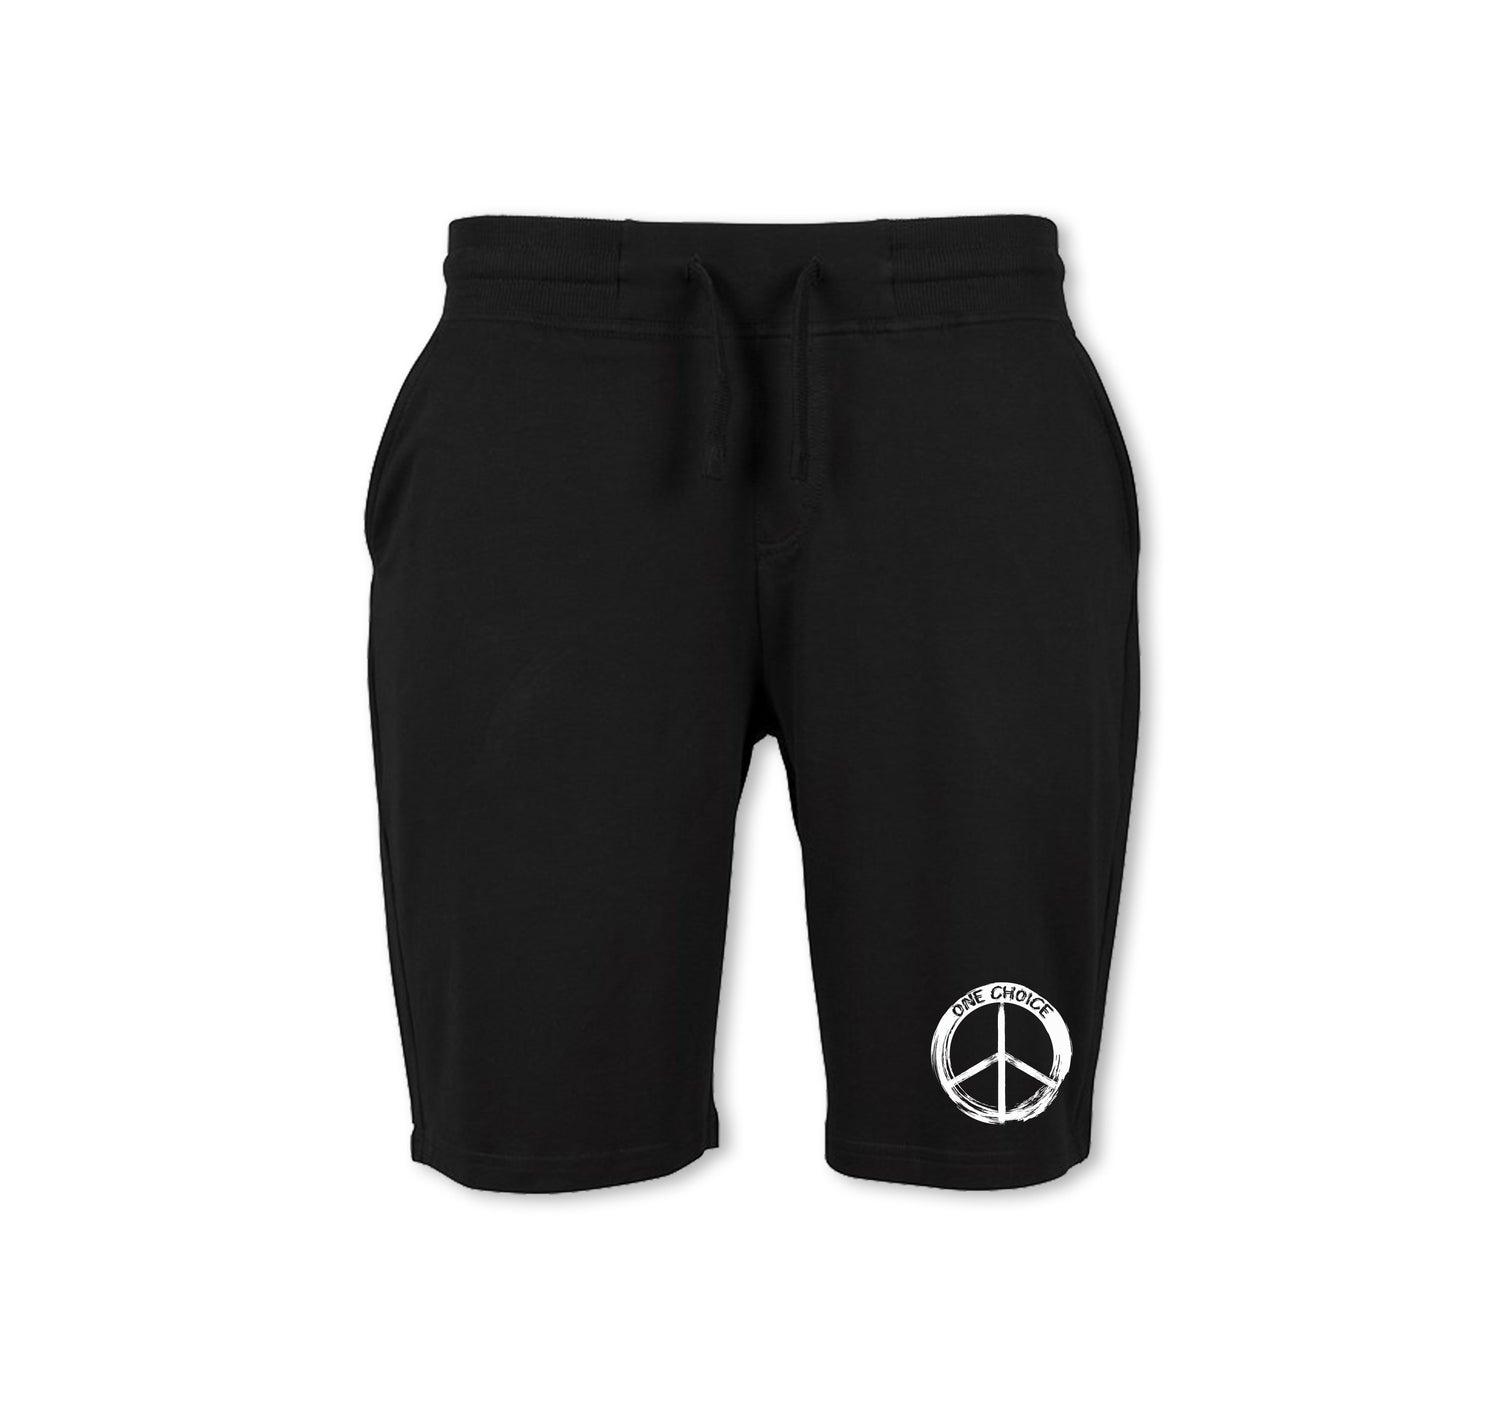 Round Peace Sign Shorts - Organic Cotton - One Choice Apparel